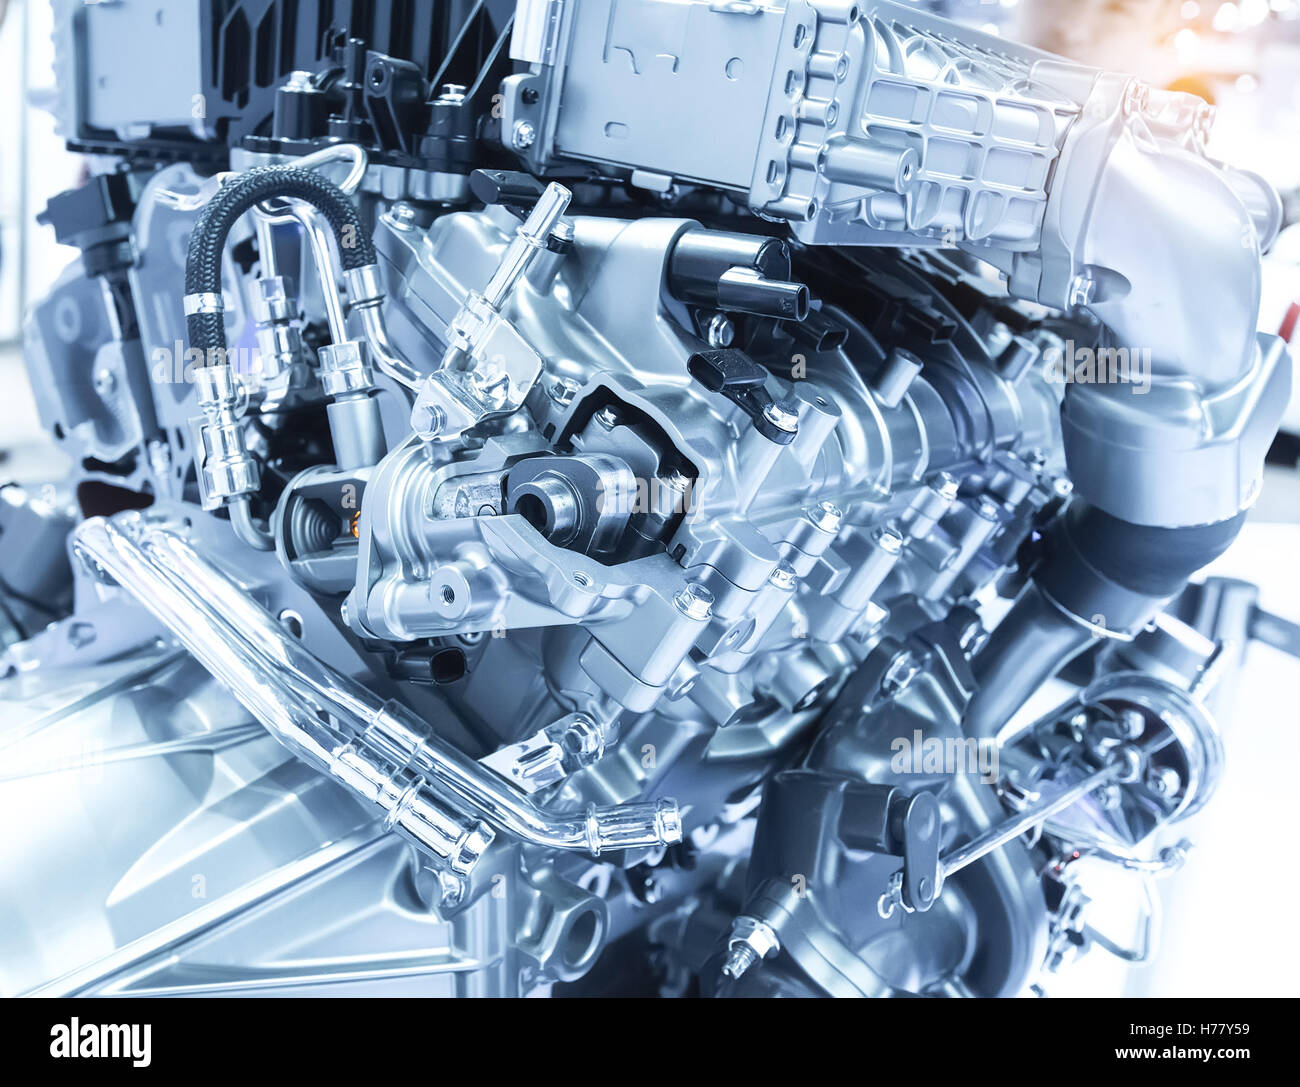 car engine section Stock Photo